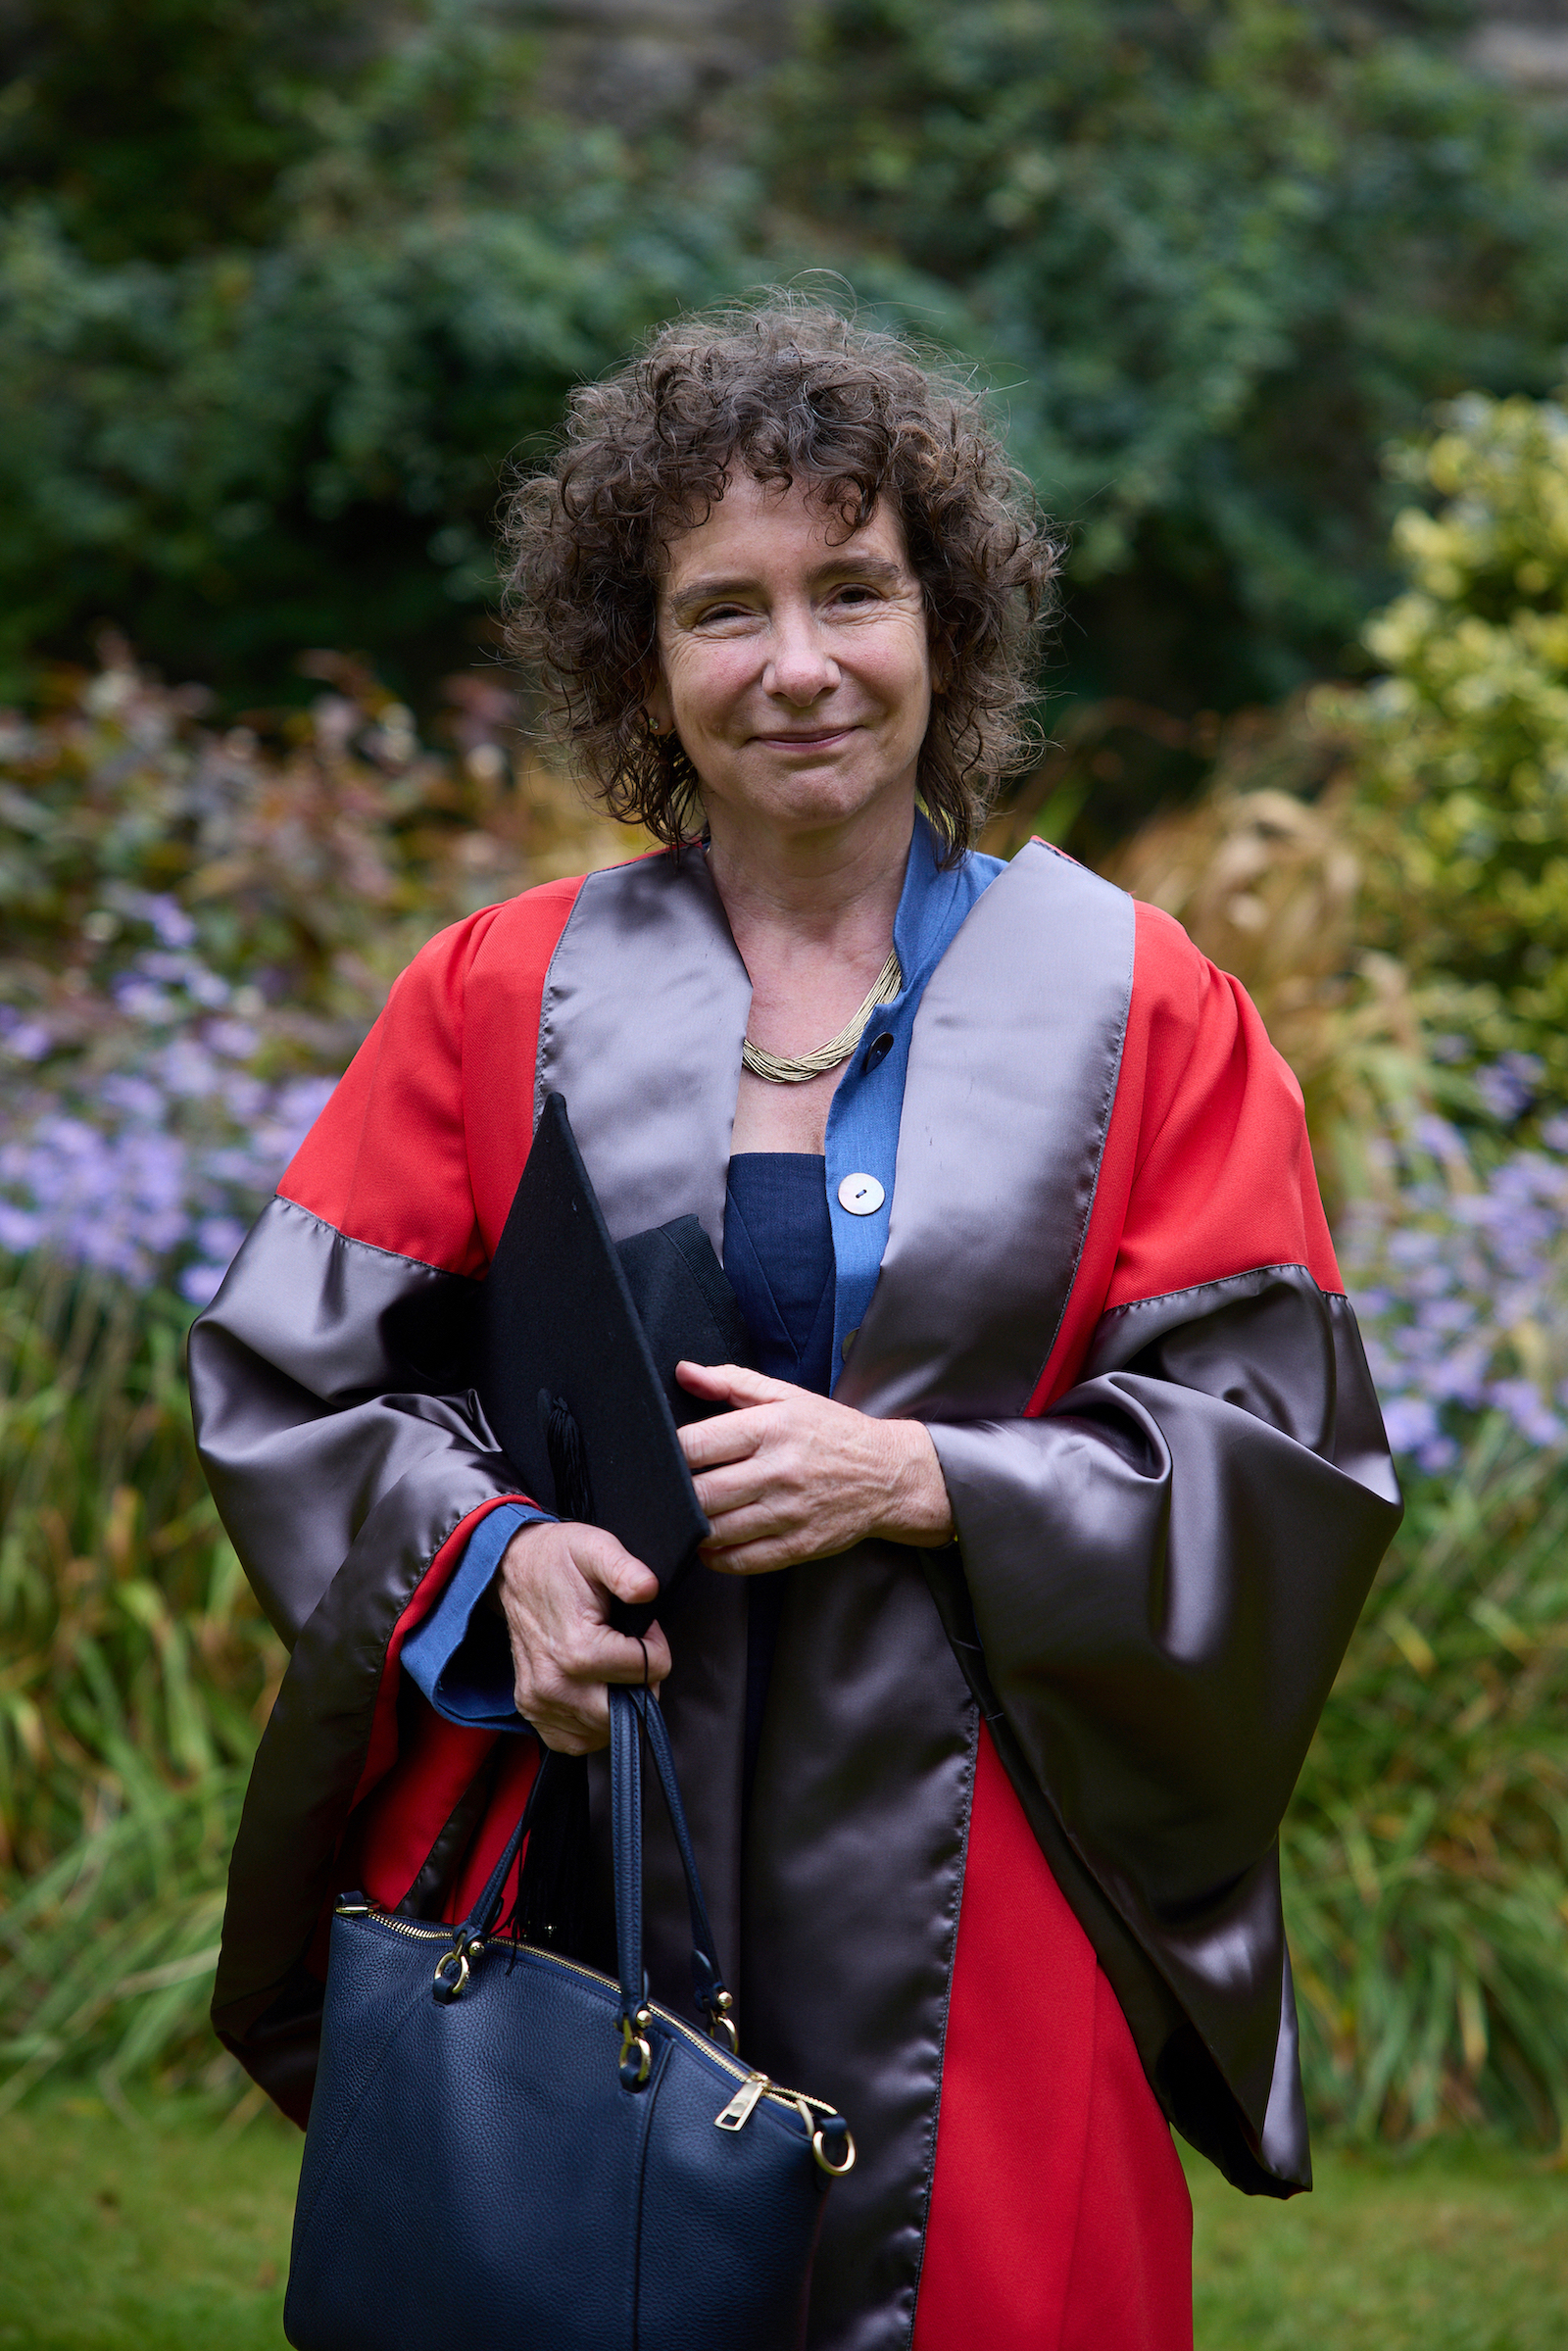 Jeanette Winterson stands in a garden wearing the bright red and grey robes for Encaenia, having received an honorary degree in 2021